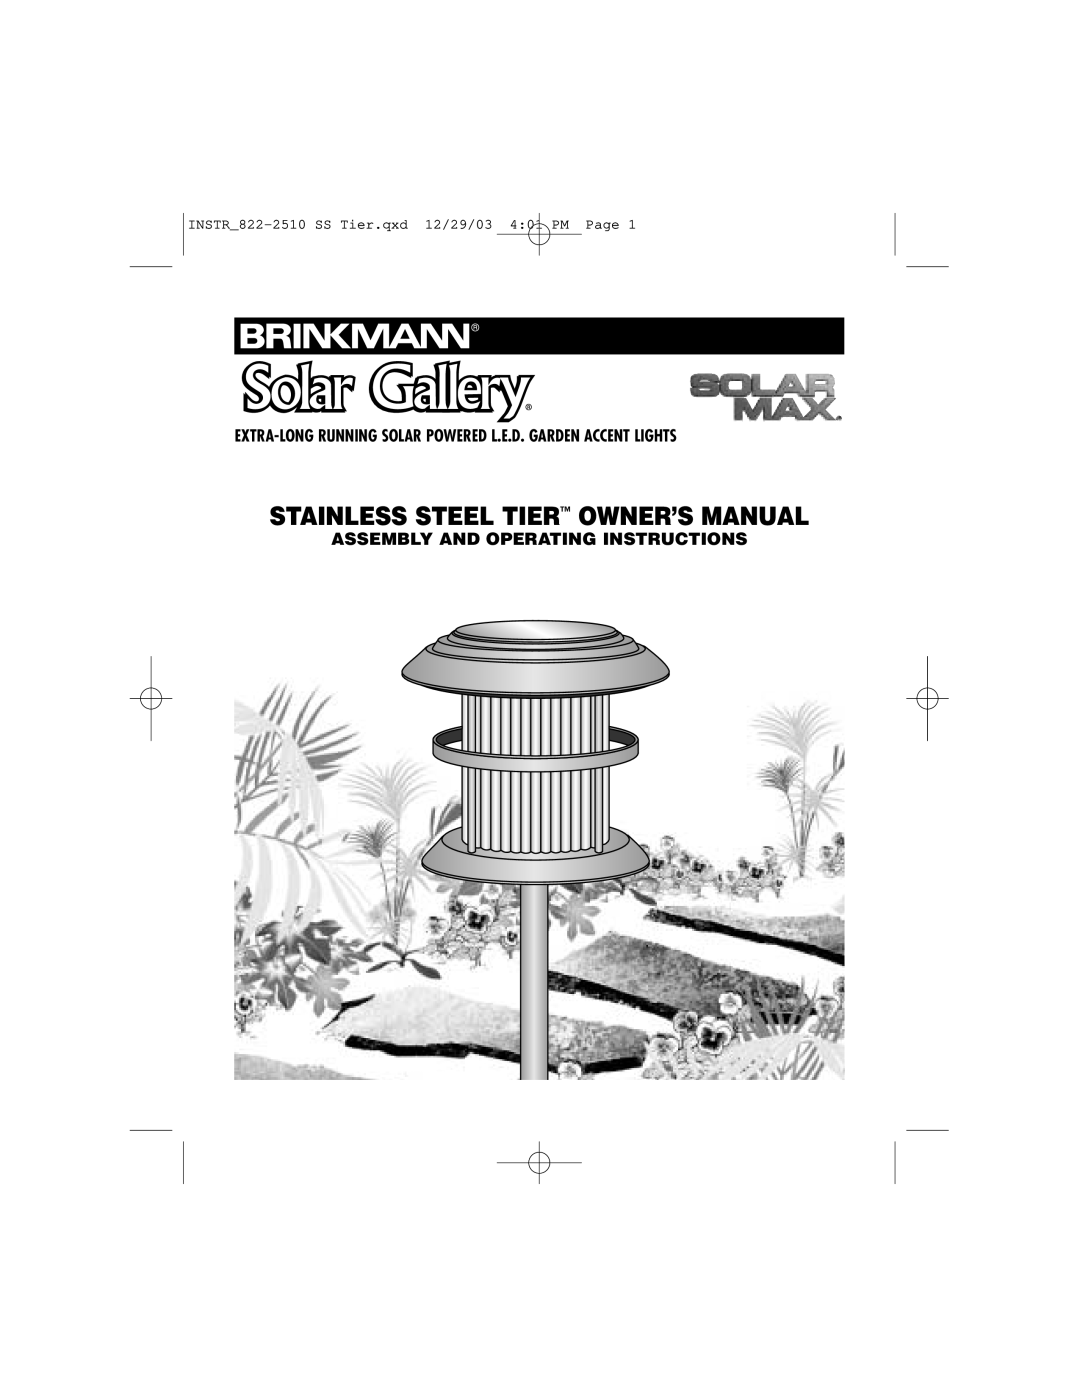 Brinkmann Stainless Steel Tier owner manual INSTR822-2510 SS Tier.qxd 12/29/03 401 PM Page 